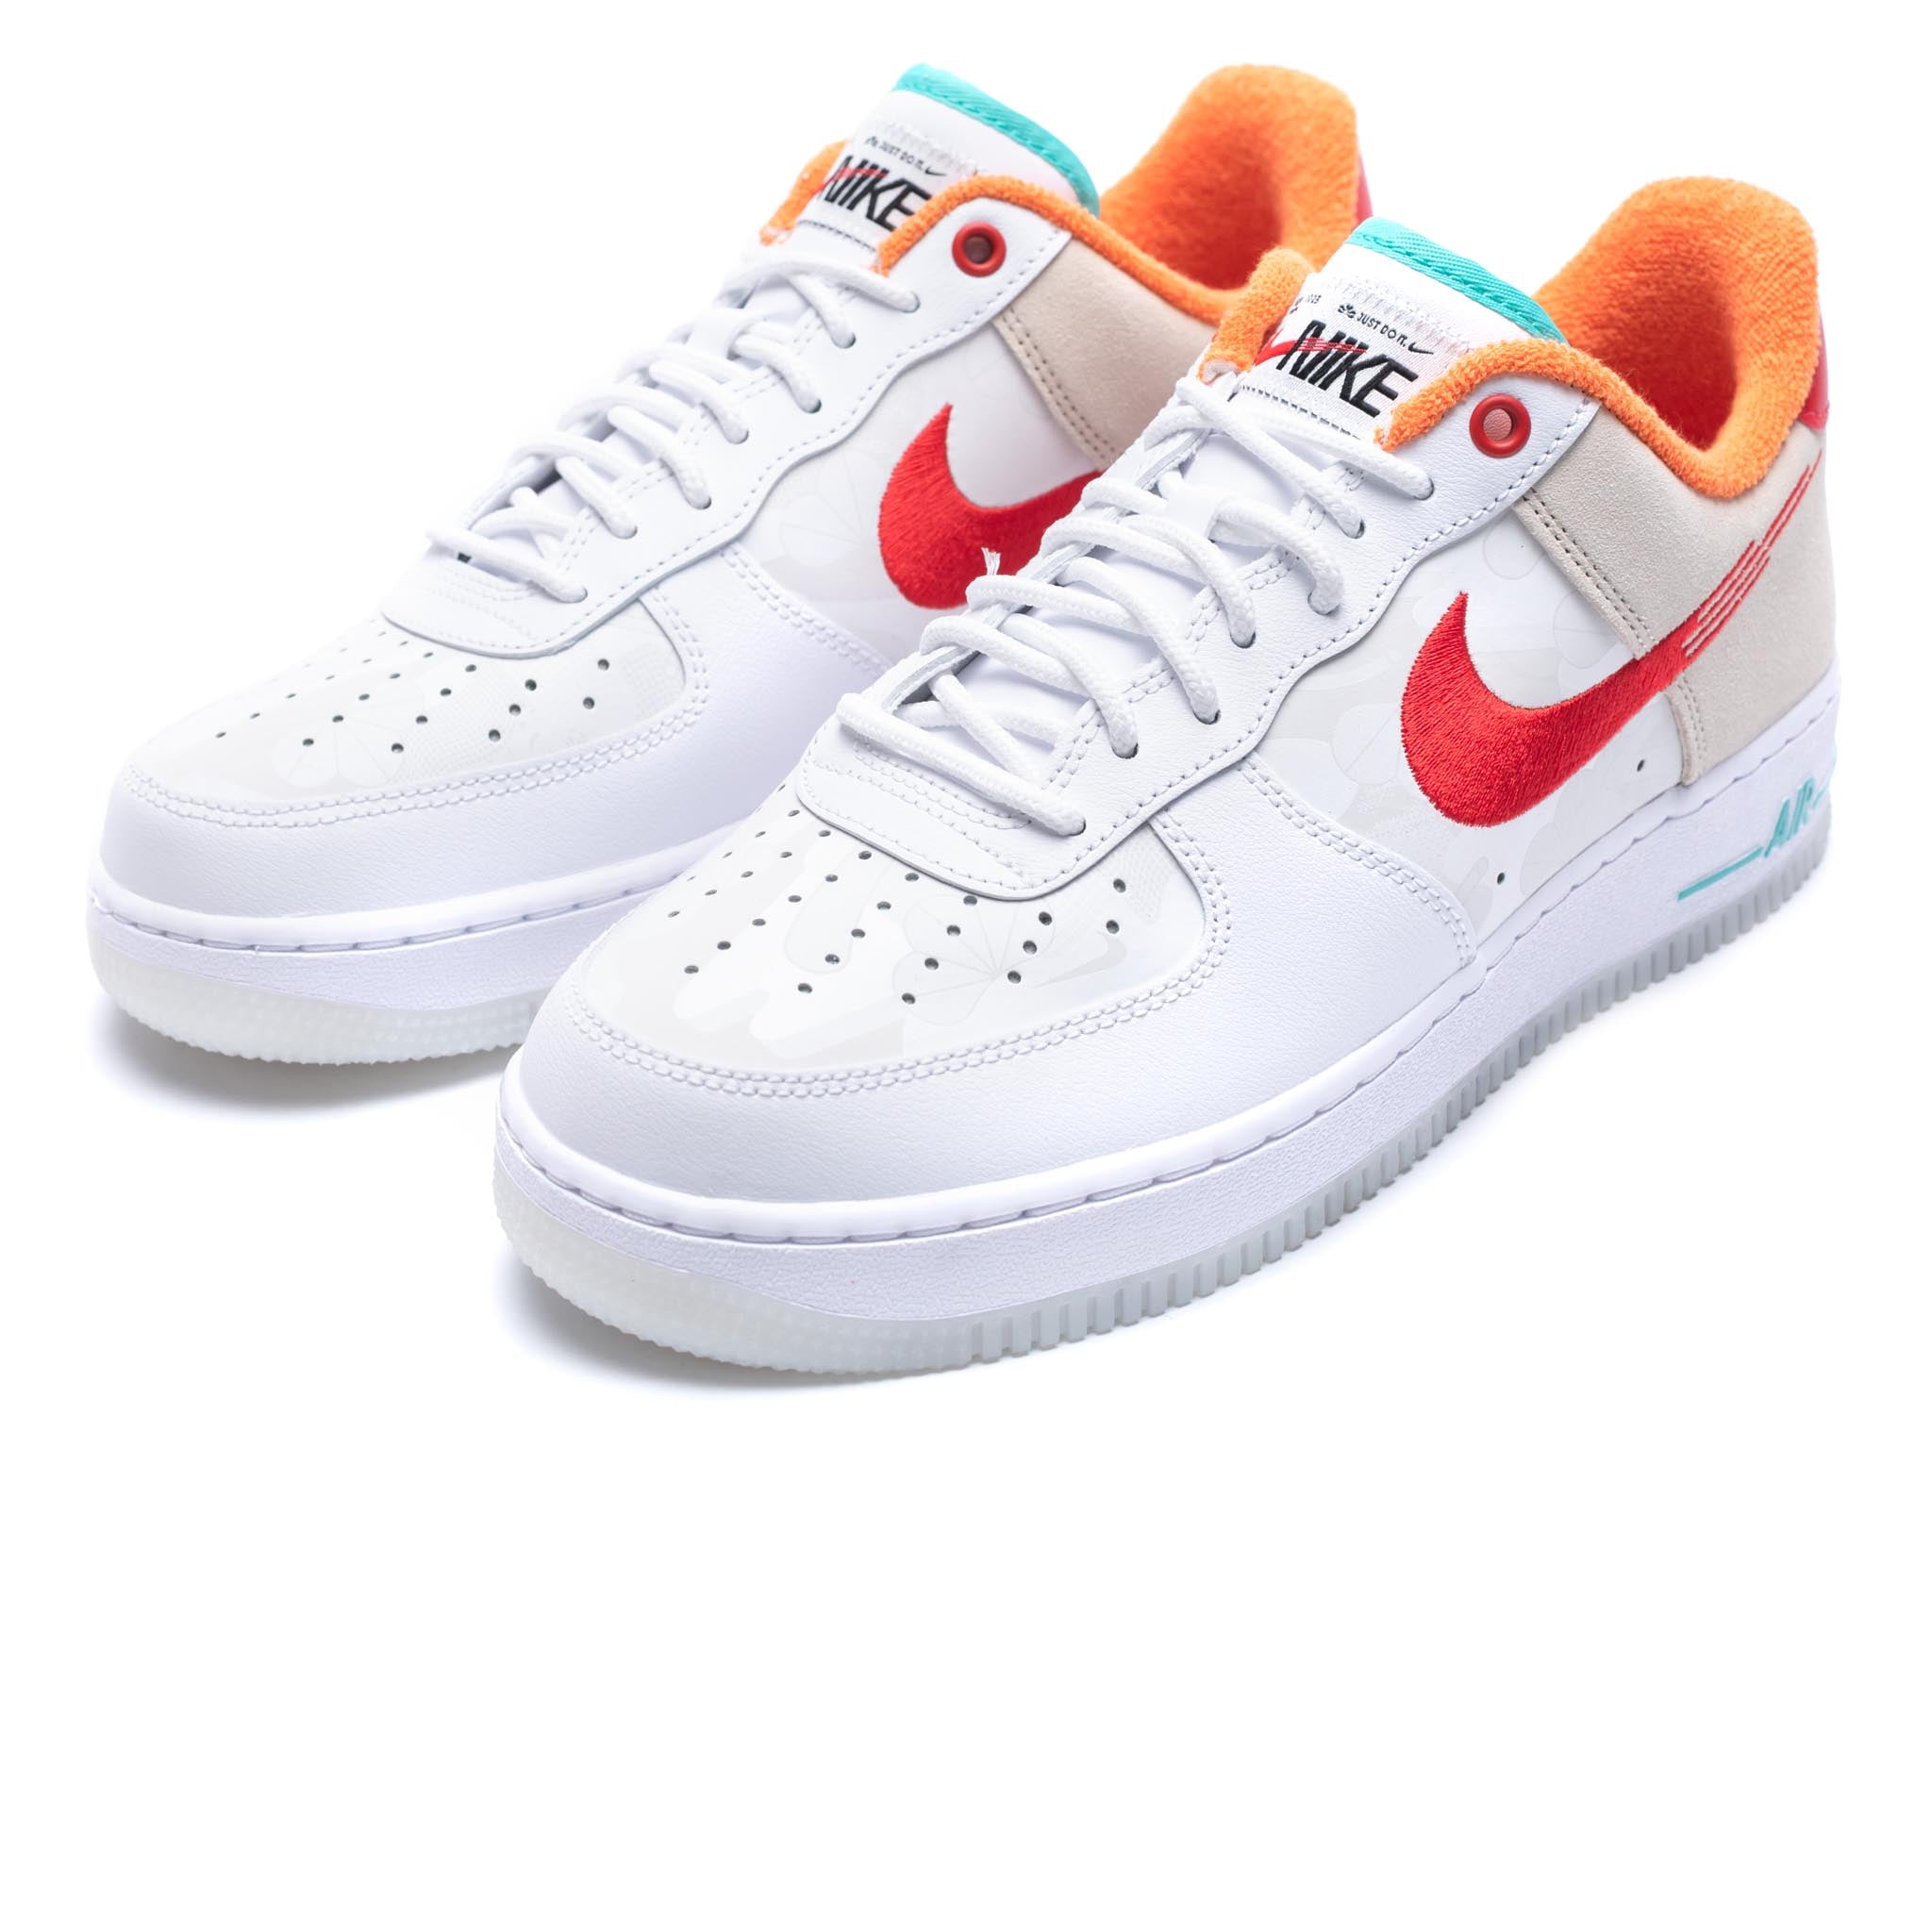 Nike Air Force 1 '07 PRM 'Just Do It'